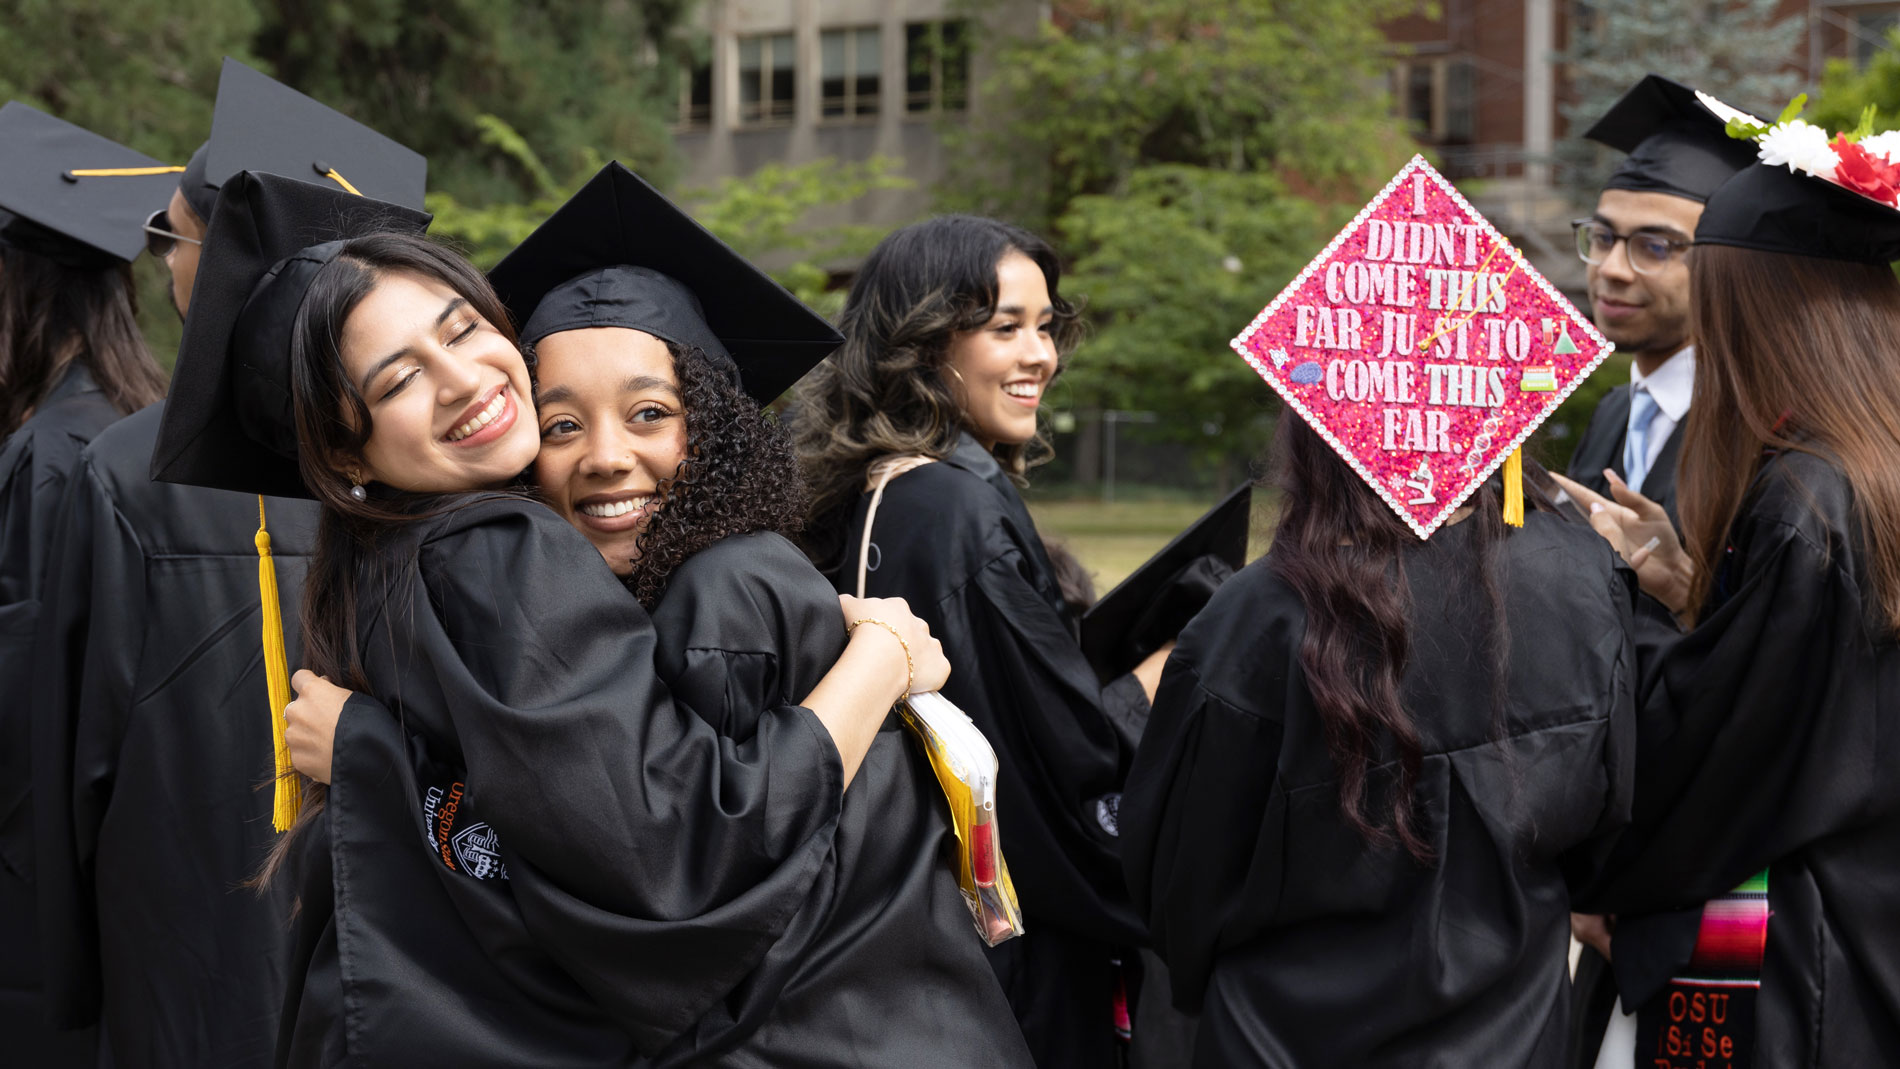  group of graduates in caps and gowns hugging and smiling at a graduation ceremony.